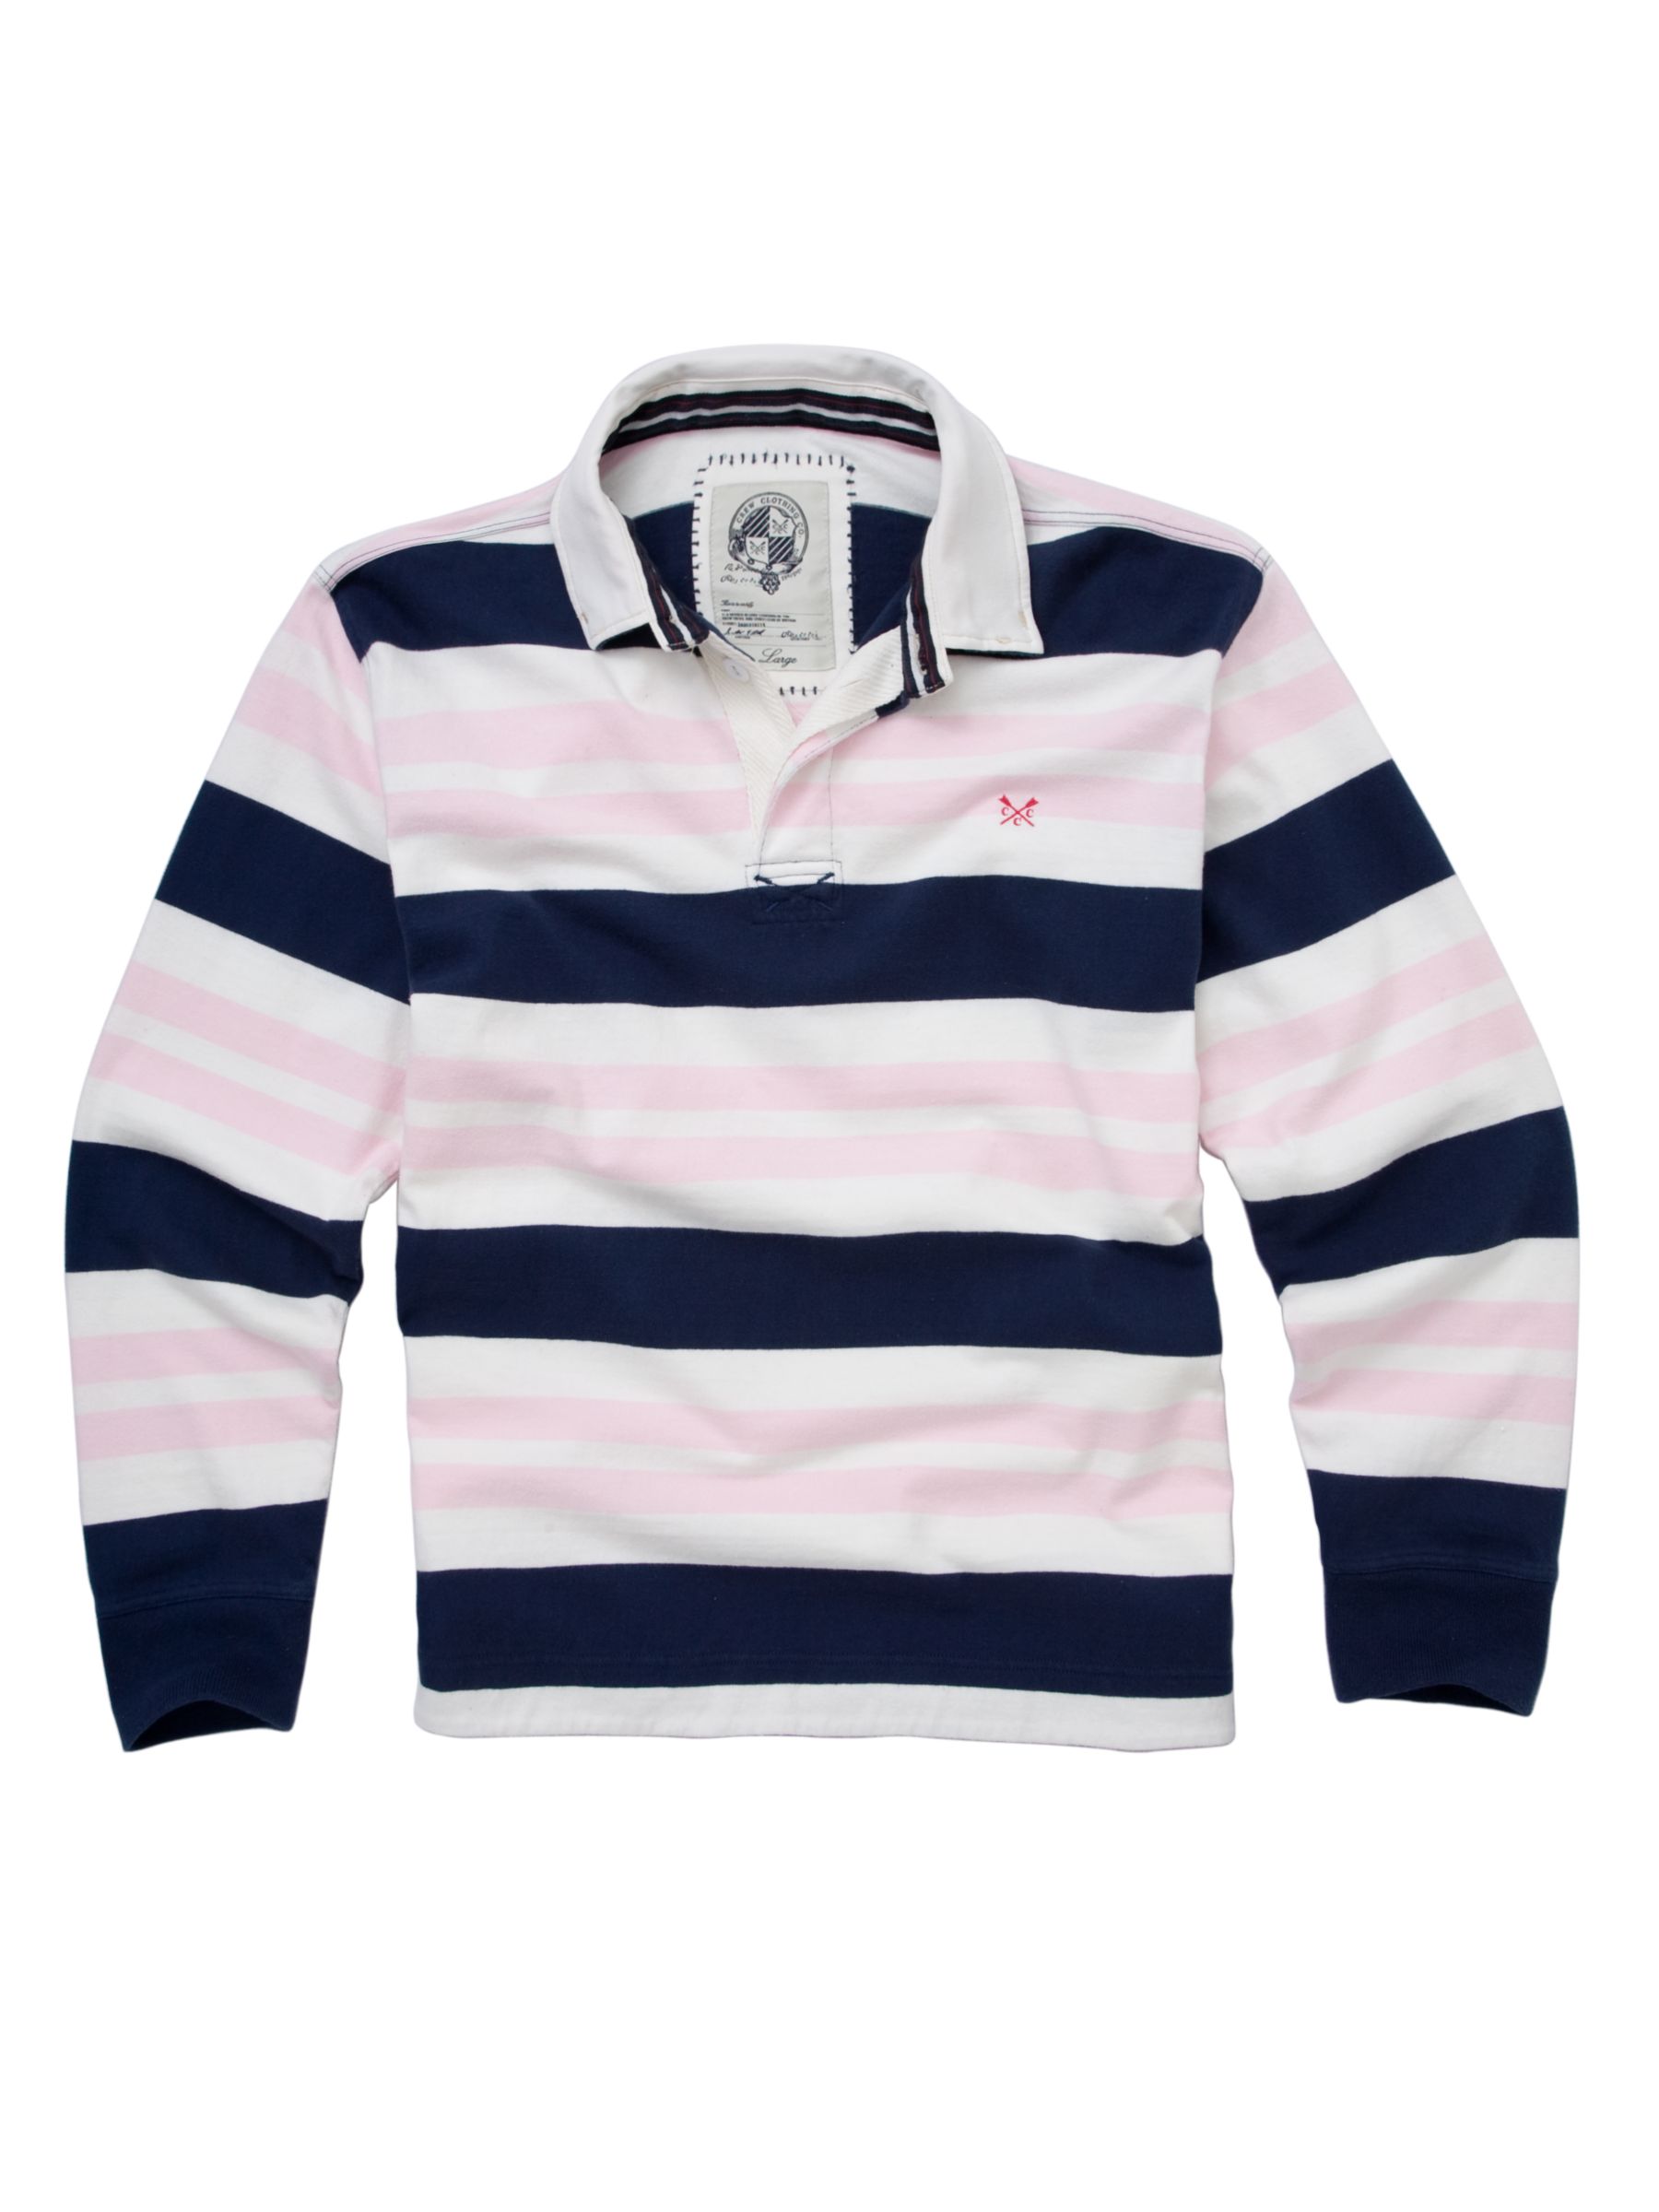 Crew Clothing Elba Rugby Shirt, White/Navy, L